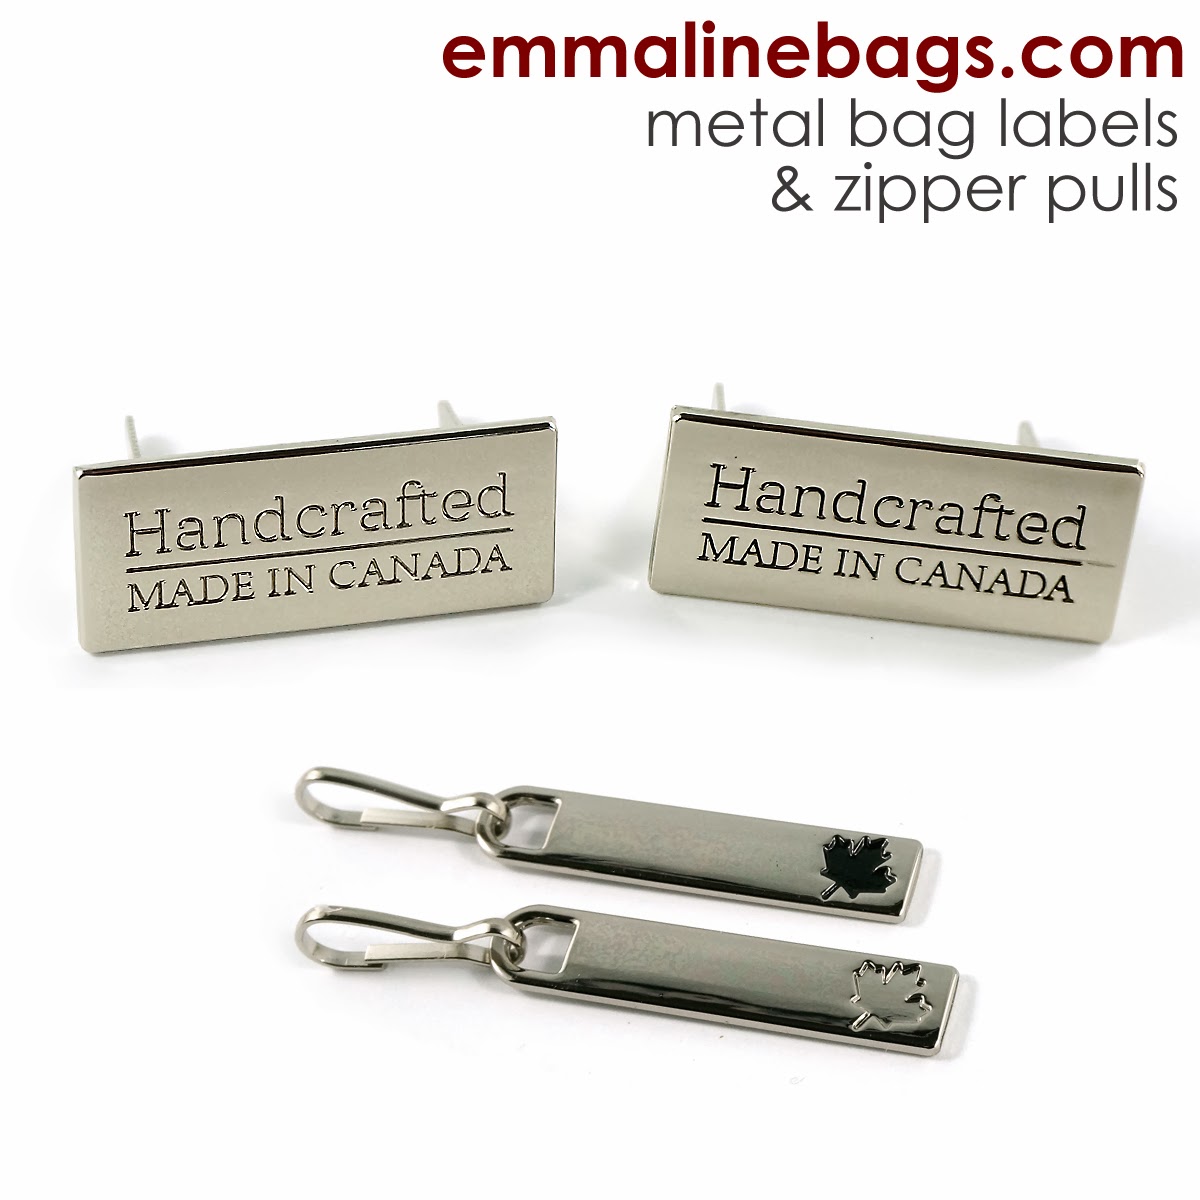 Made in Canada labels and zipper pulls